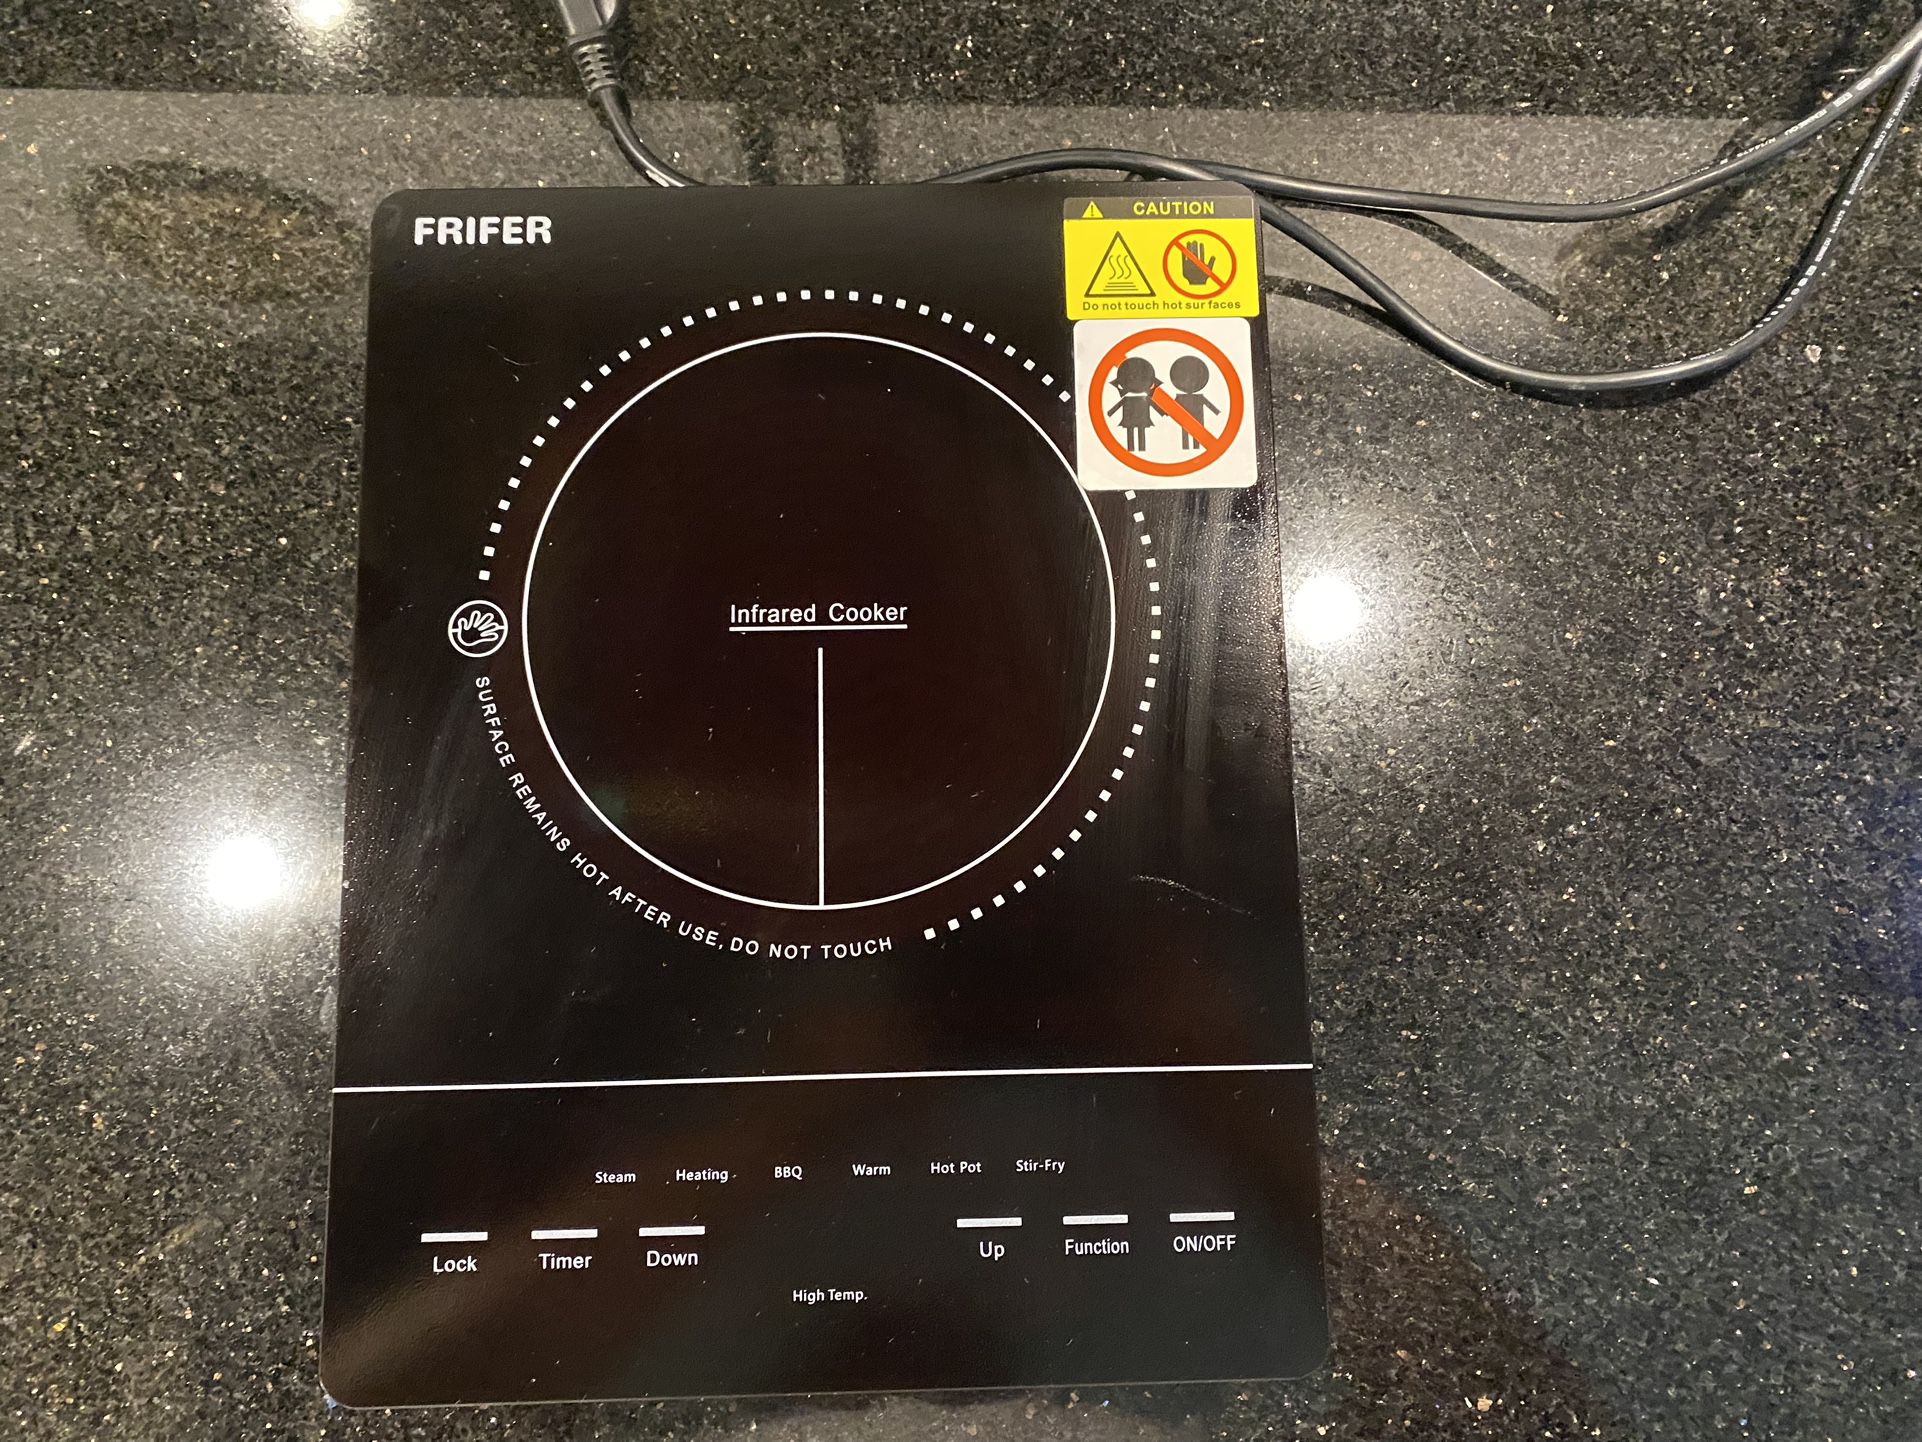 HBHOB FIC403 24 Inches Induction Cooktop 4 Burners Glass Surface